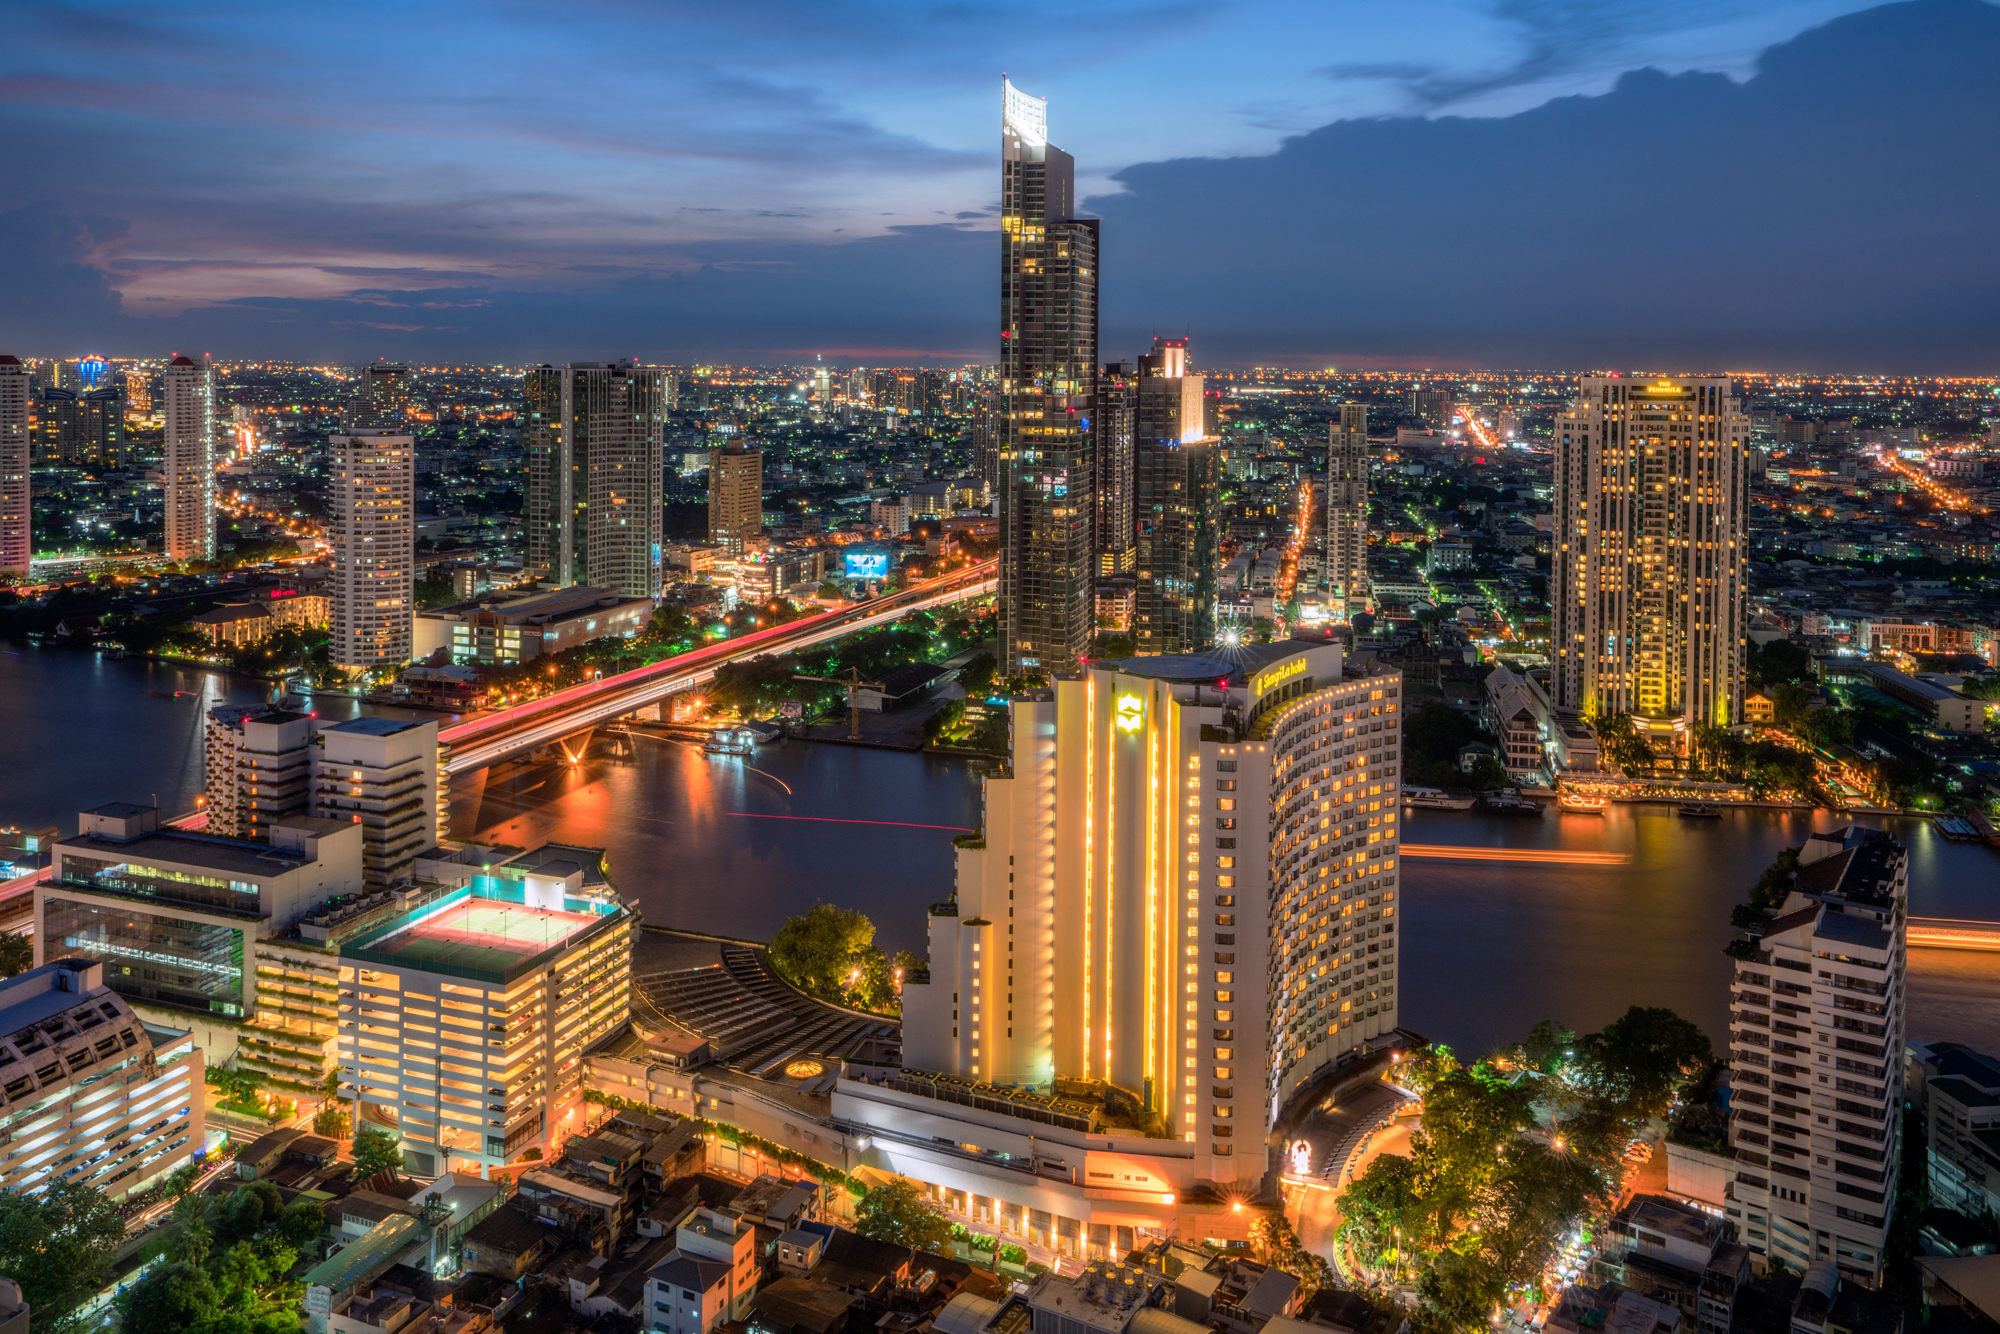 Bangkok City Scene at Sunset - Andy T Laird Photography